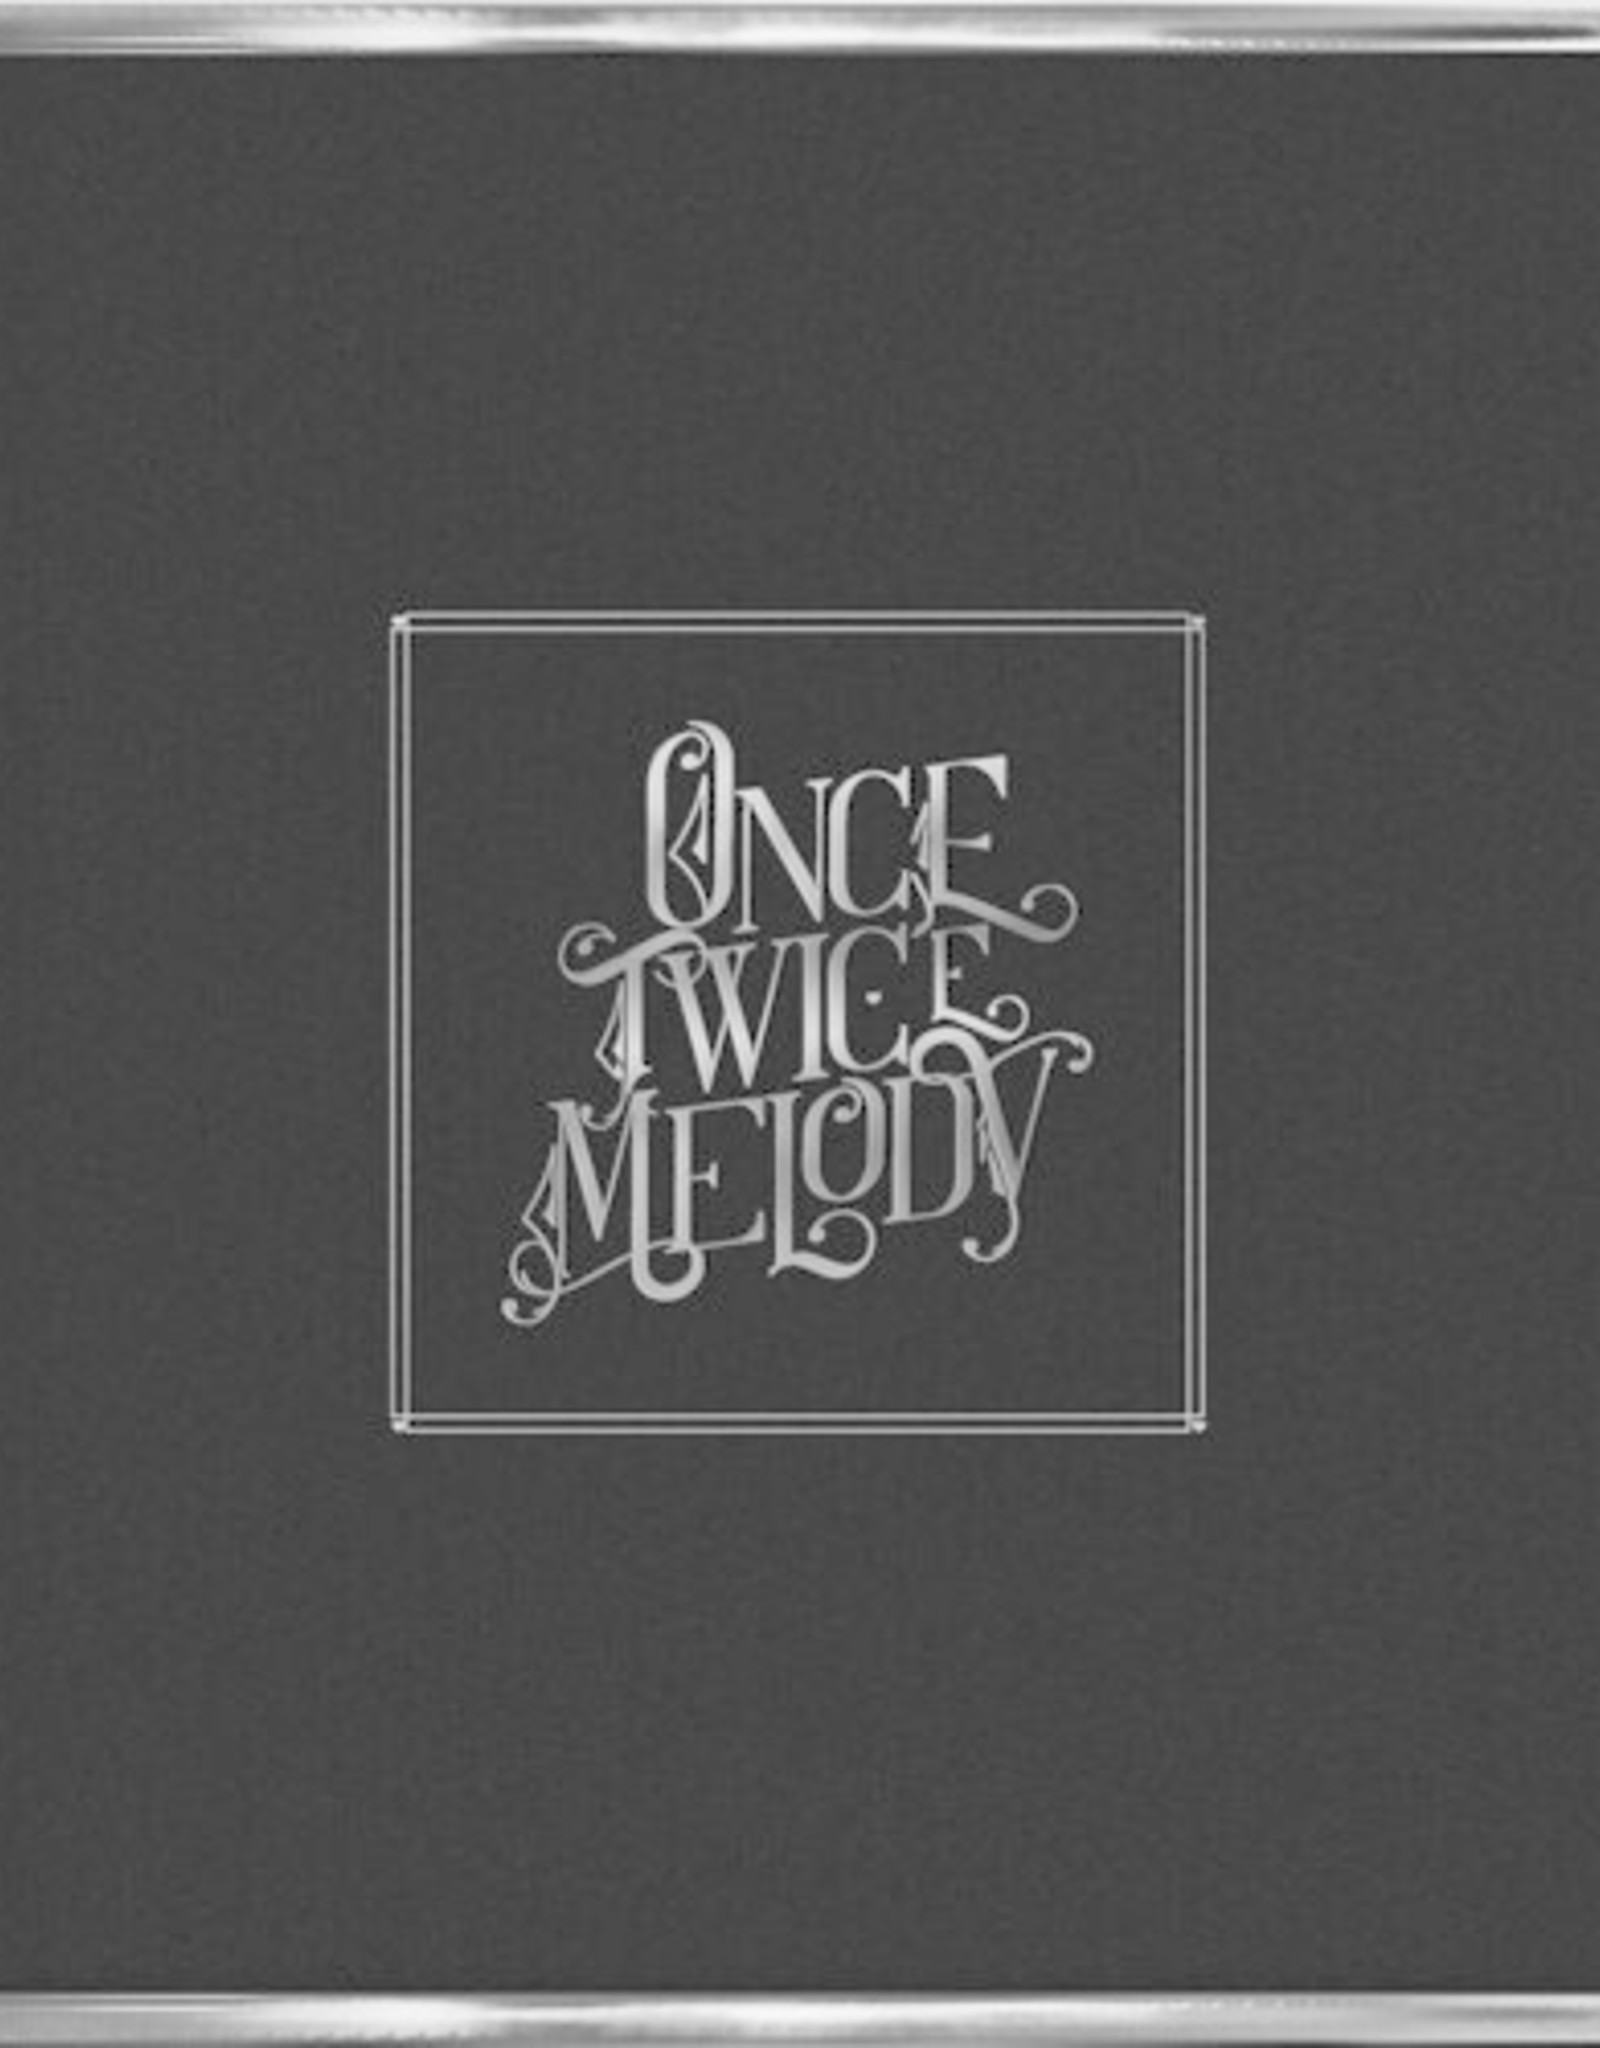 Beach House - Once Twice Melody (Silver Edition Black Vinyl)